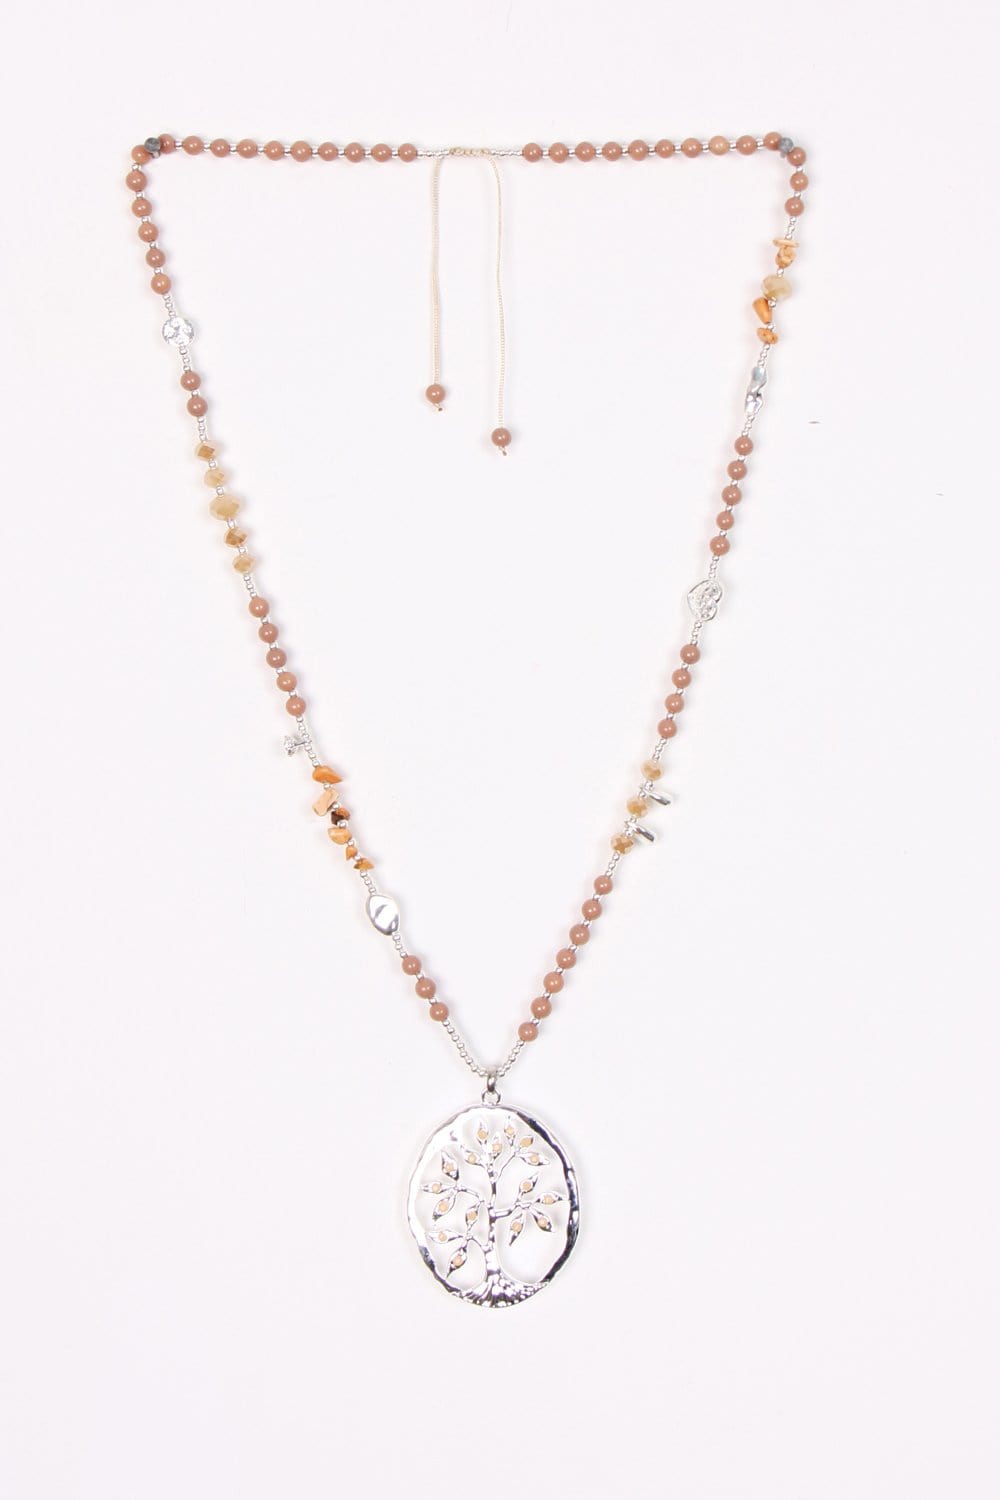 Babs Beaded Tree of Life Necklace - LB Clothing